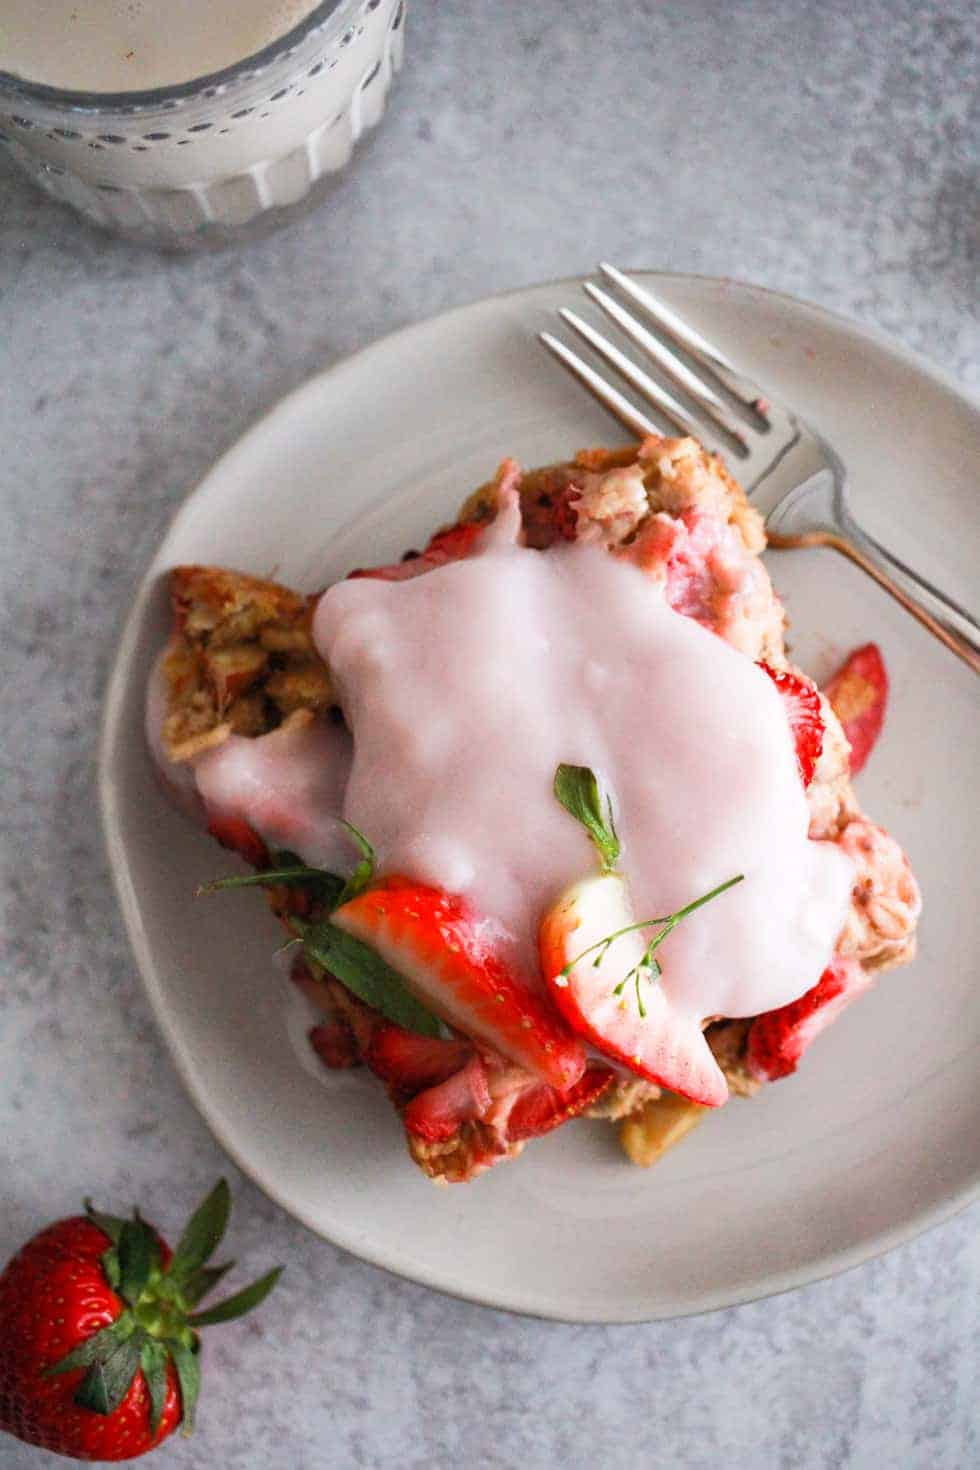 Strawberry Banana Baked Oatmeal Vegetarian Freezer Meal topped with strawberries and yogurt on a white plate.